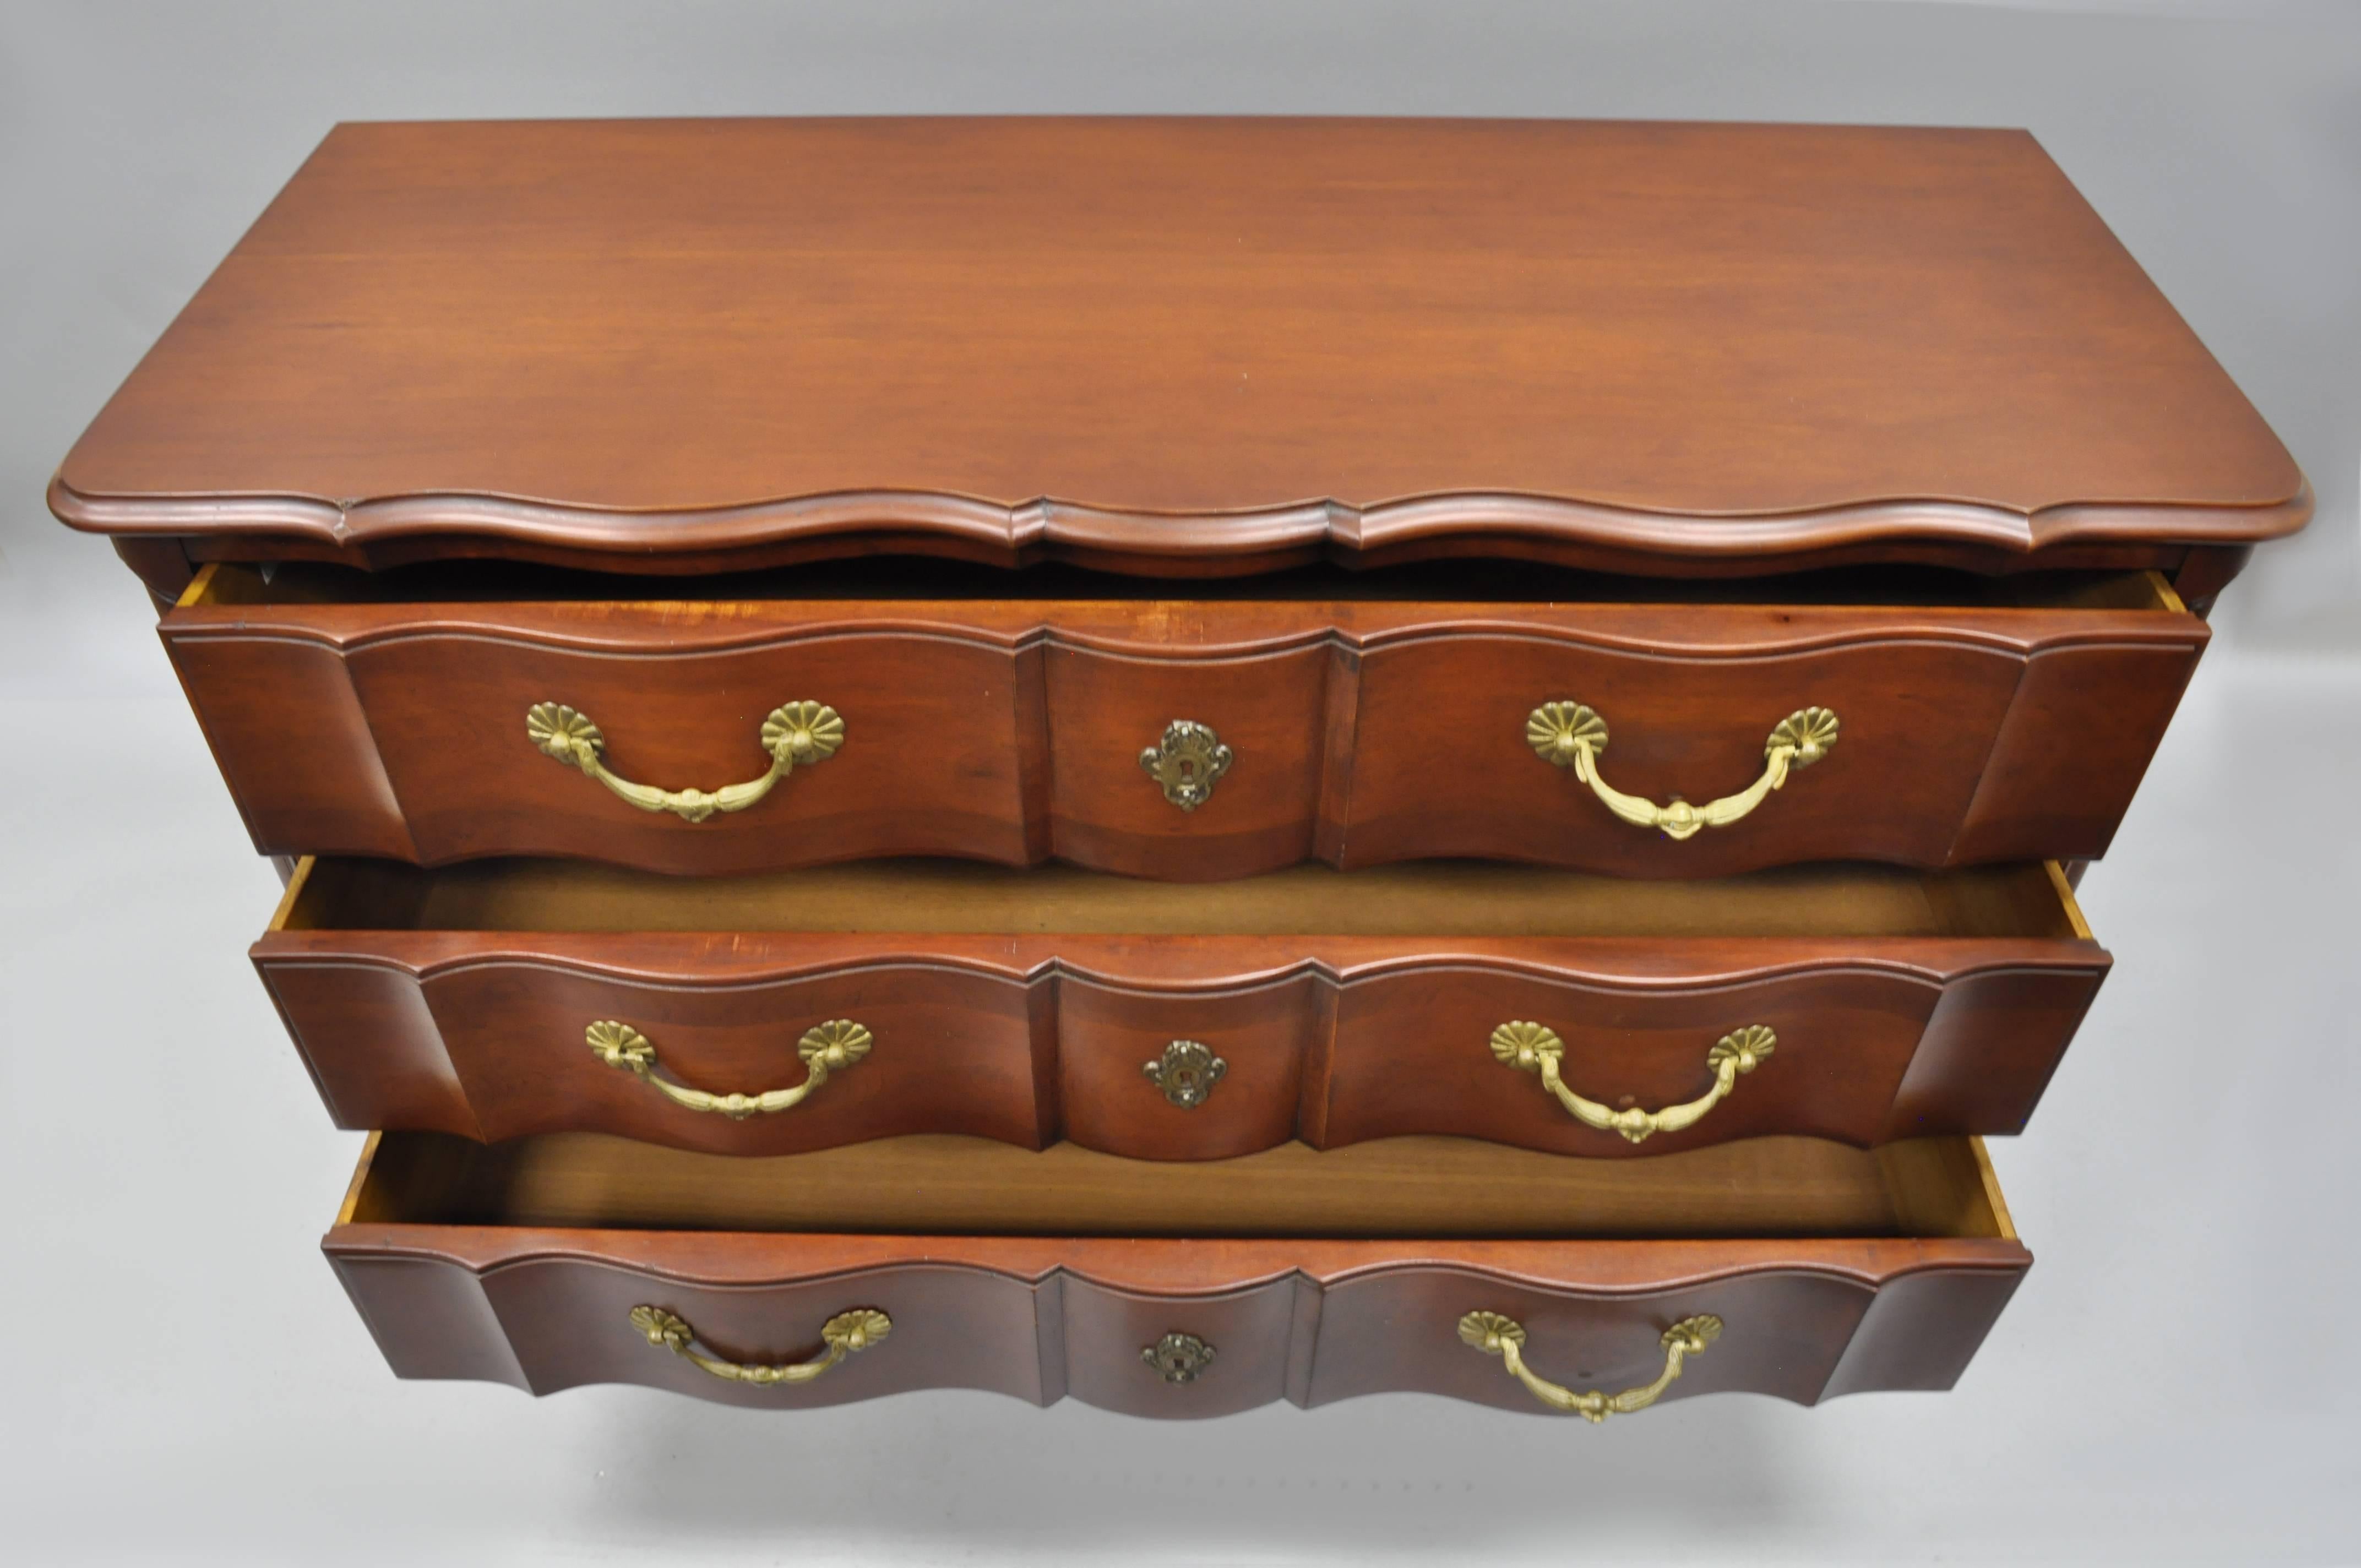 Vintage French Country / Louis XV style bachelor chest by John Widdicomb. This cherry wood commode features beautiful wood grain, three dovetail constructed drawers, solid brass hardware, cabriole legs, shaped front, and quality American